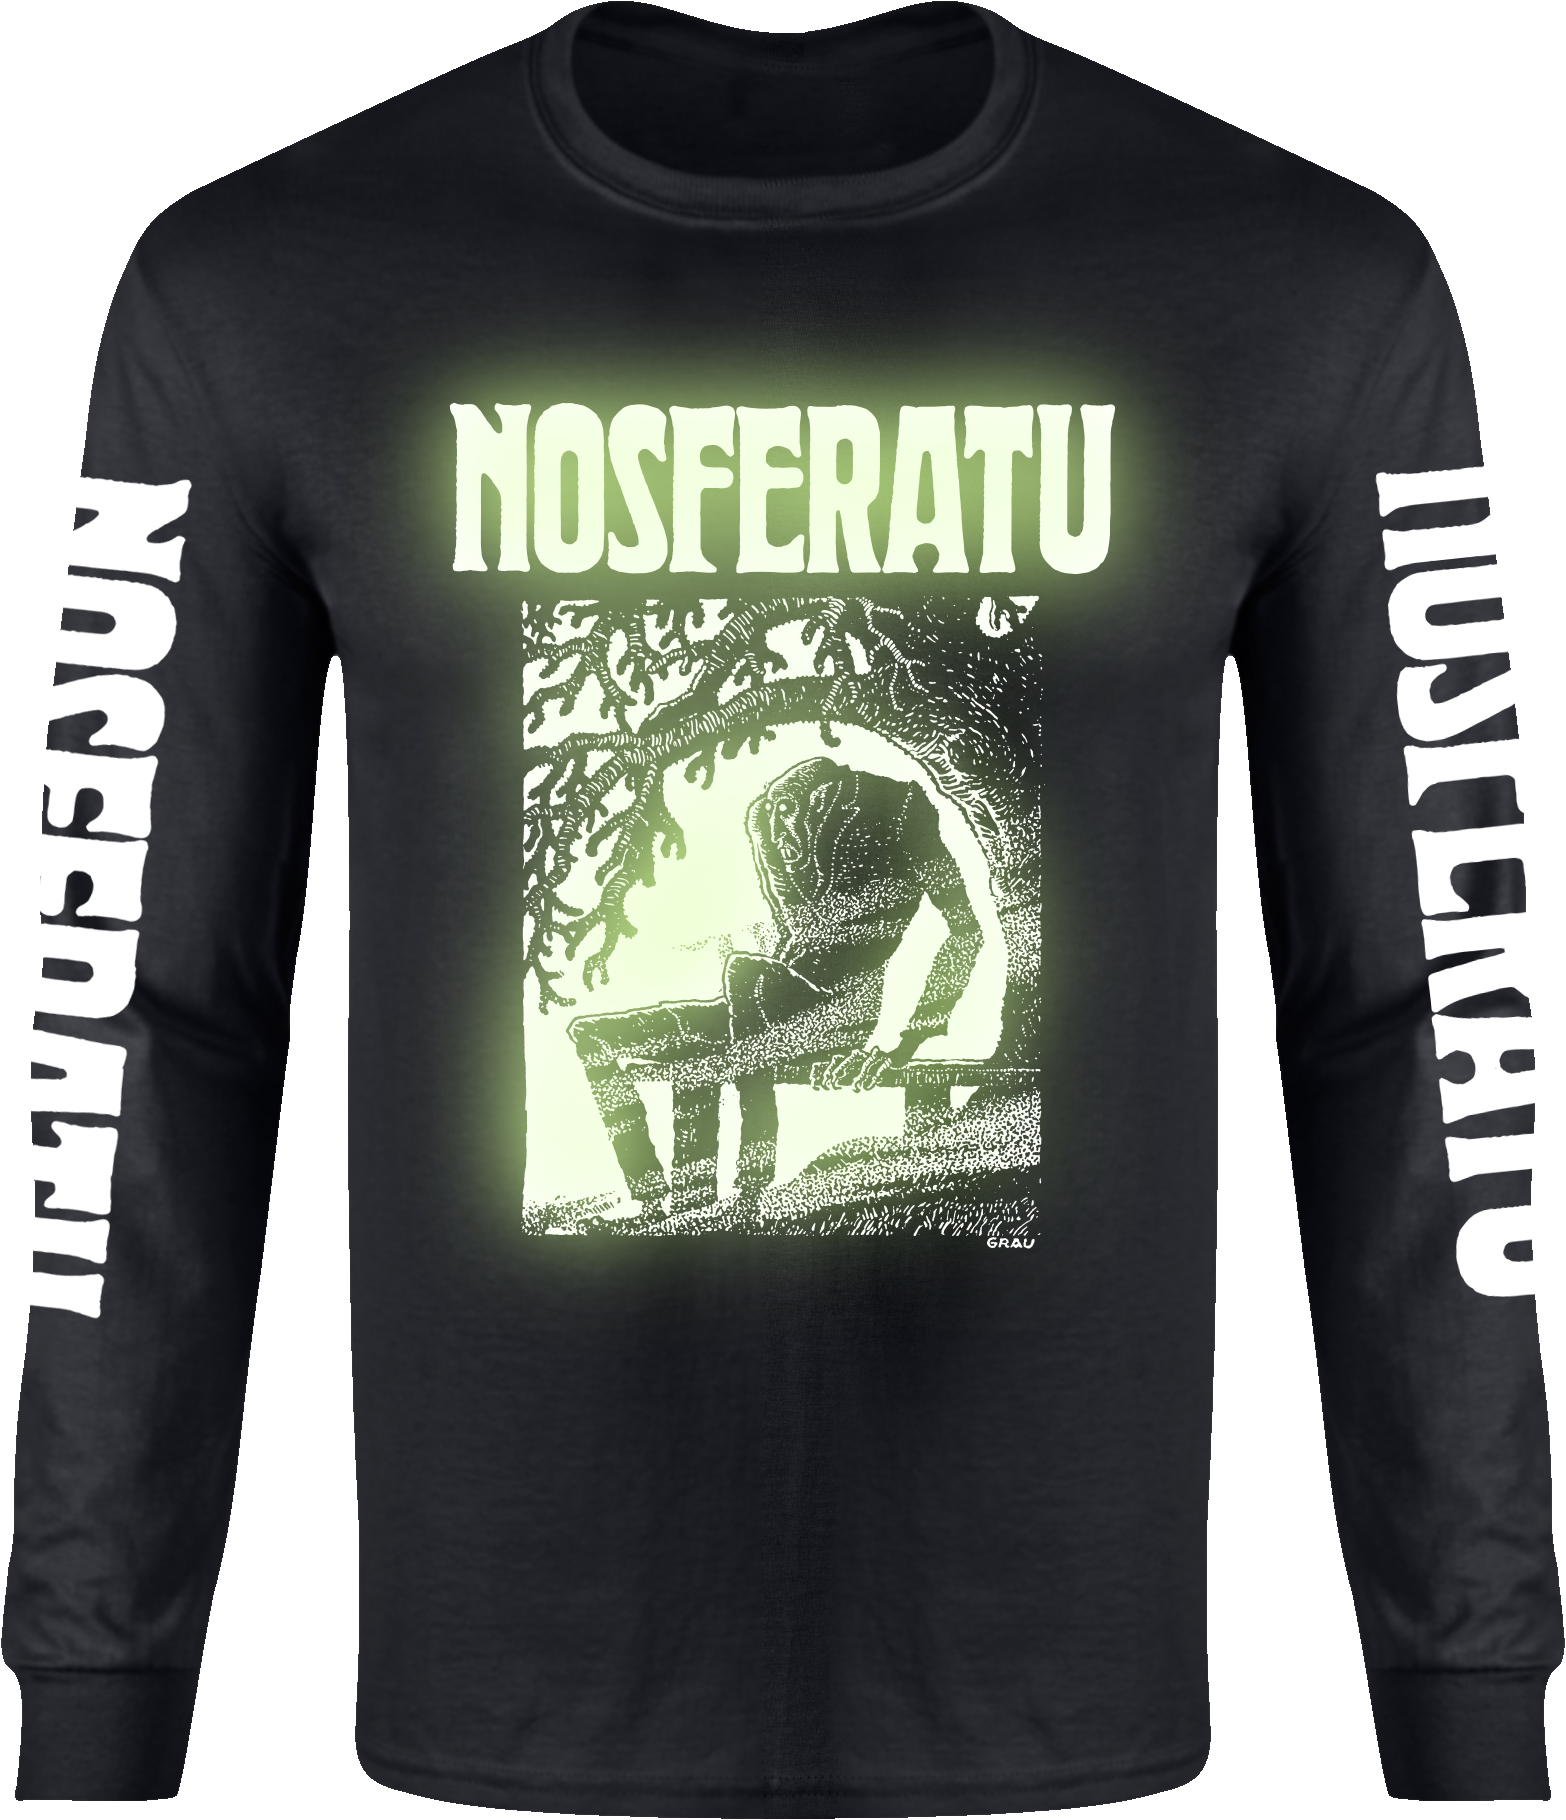 ATOM AGE NOSFERATU "ILLUSTRATED" LIMITED EDITION GLOW IN THE DARK LONG SLEEVE T-SHIRT